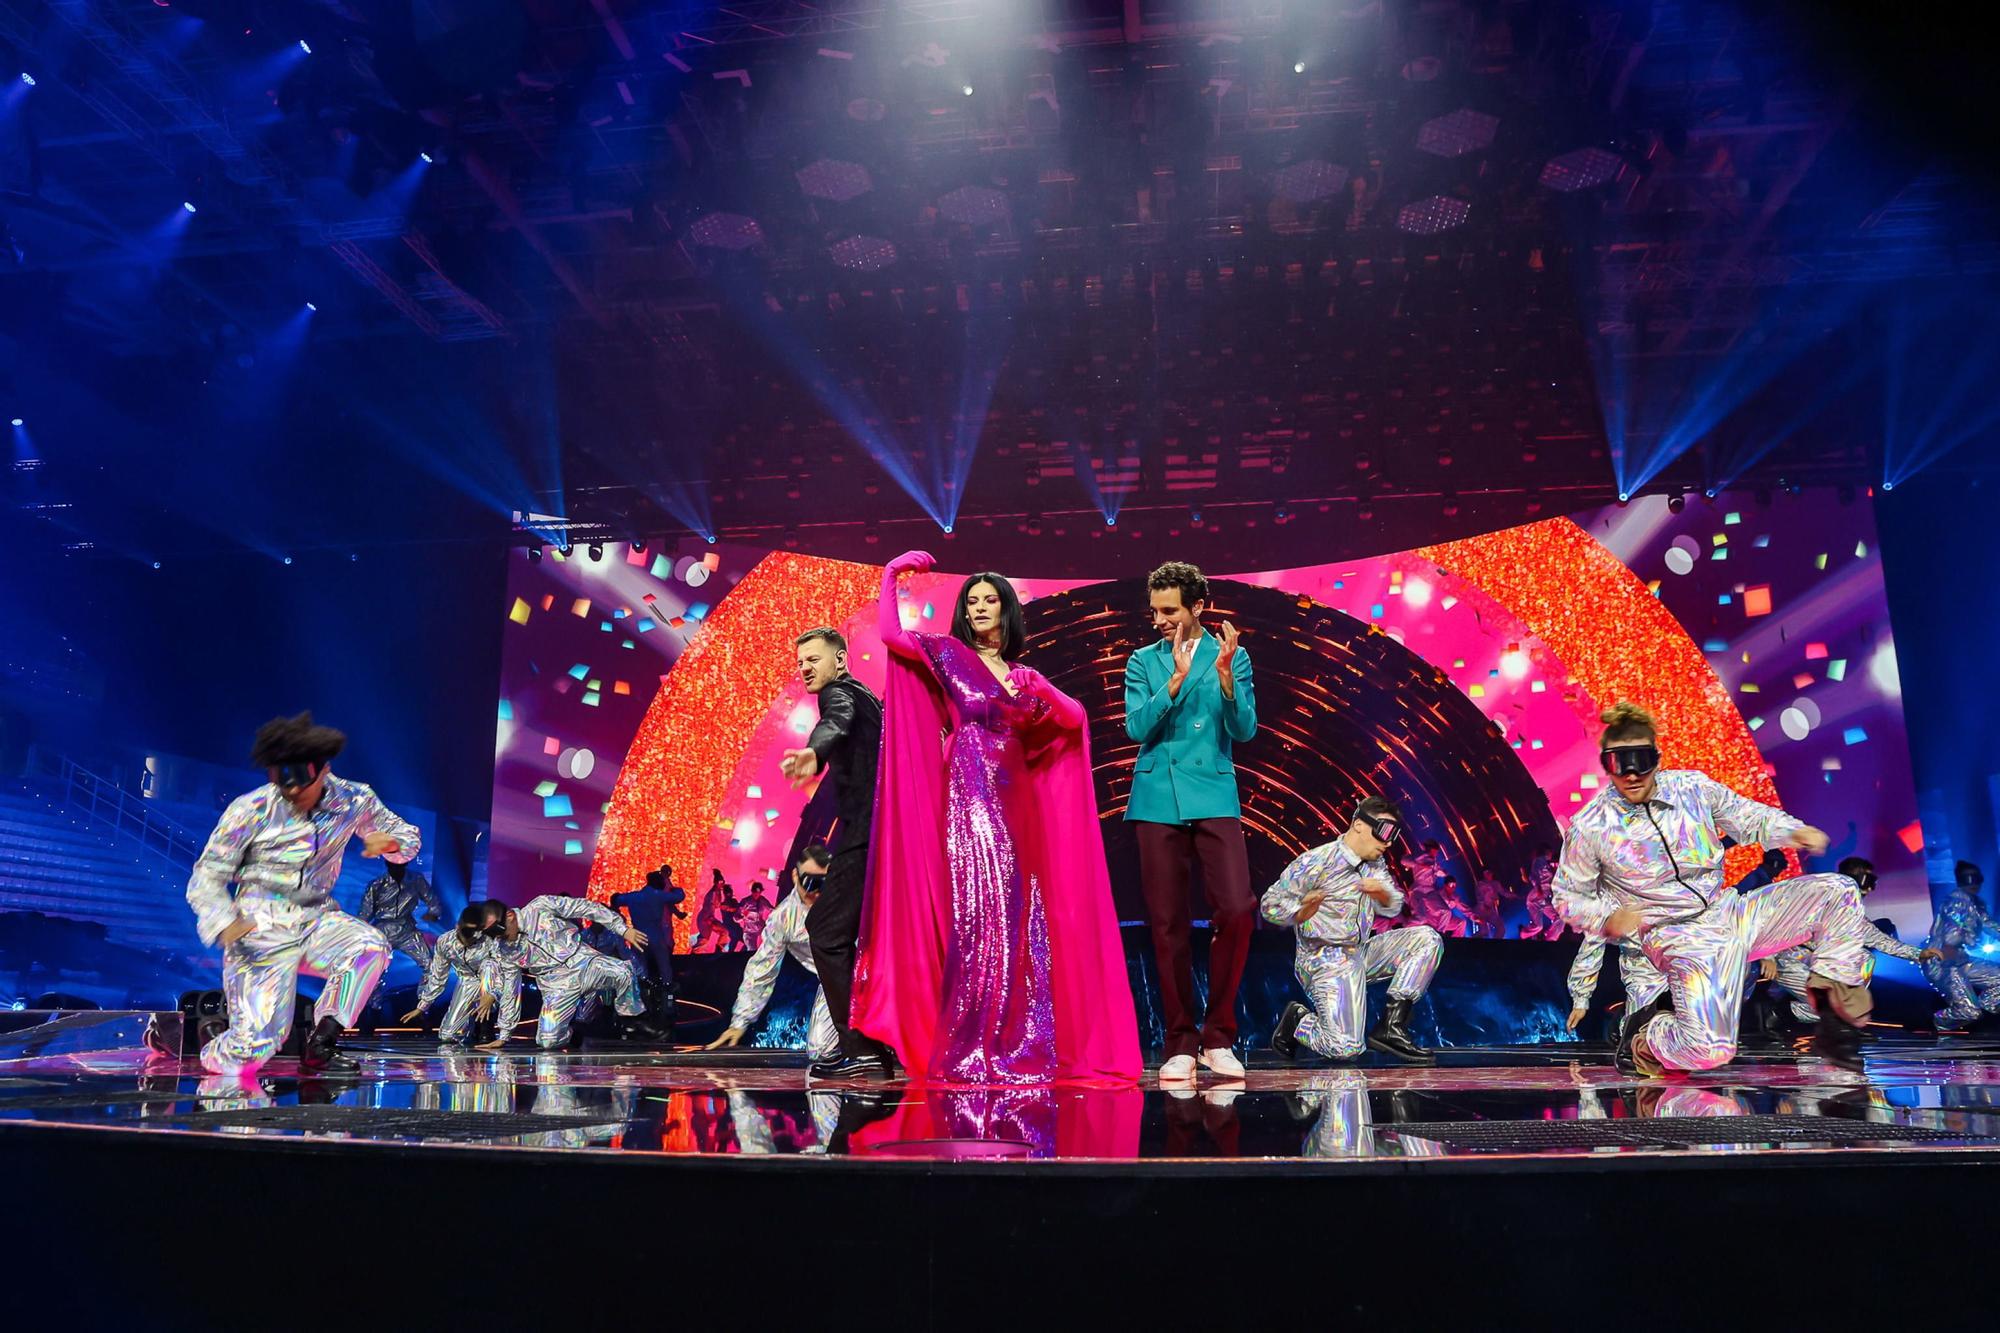 First Semi Final - 66th Eurovision Song Contest in Turin